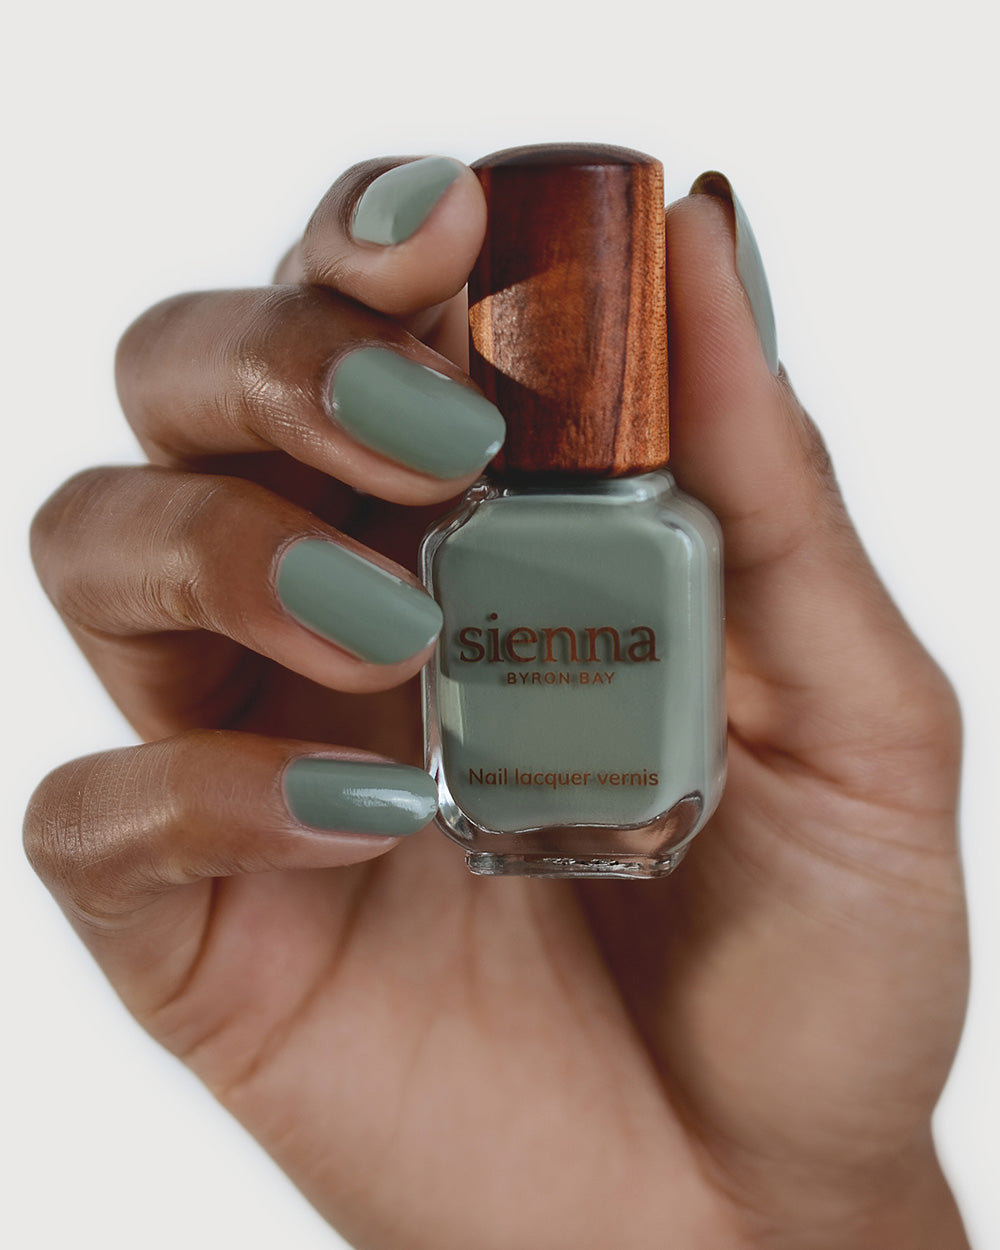 Medium tanned skin hand wearing Soundscape sage green crème nail polish by Sienna Byron Bay and holding bottle with timber lid by Sienna Byron Bay